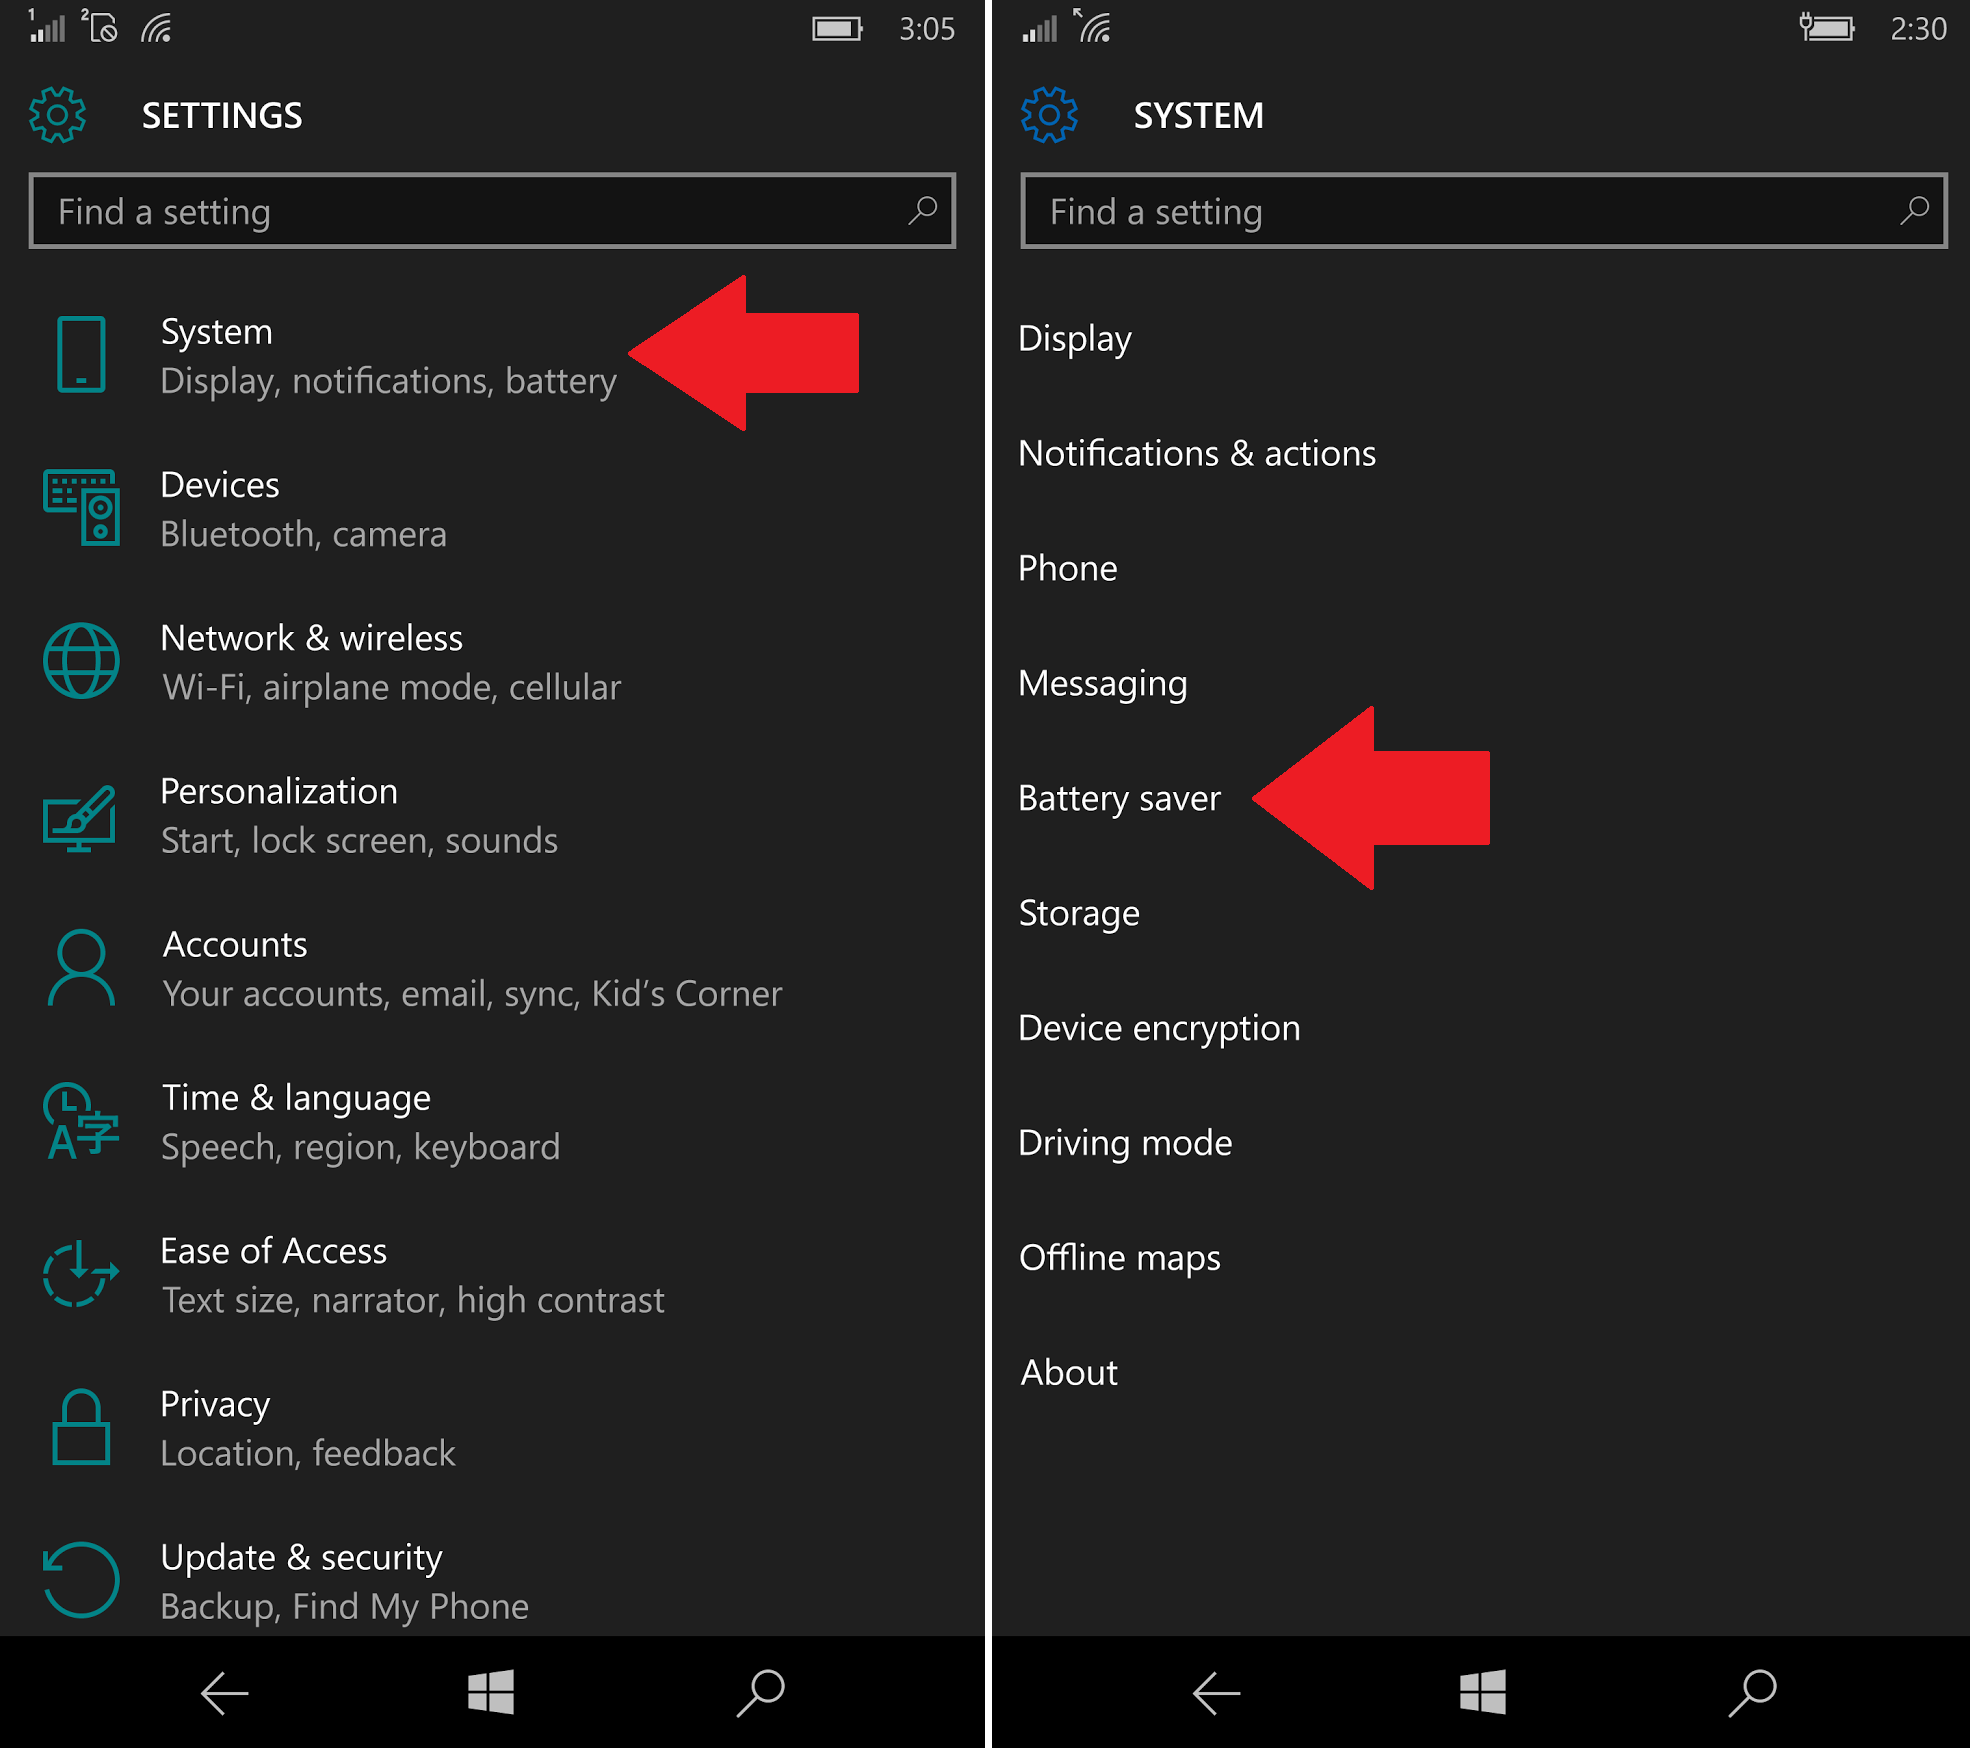 How To Disable Background Apps For The Lumia 950 And Windows 10